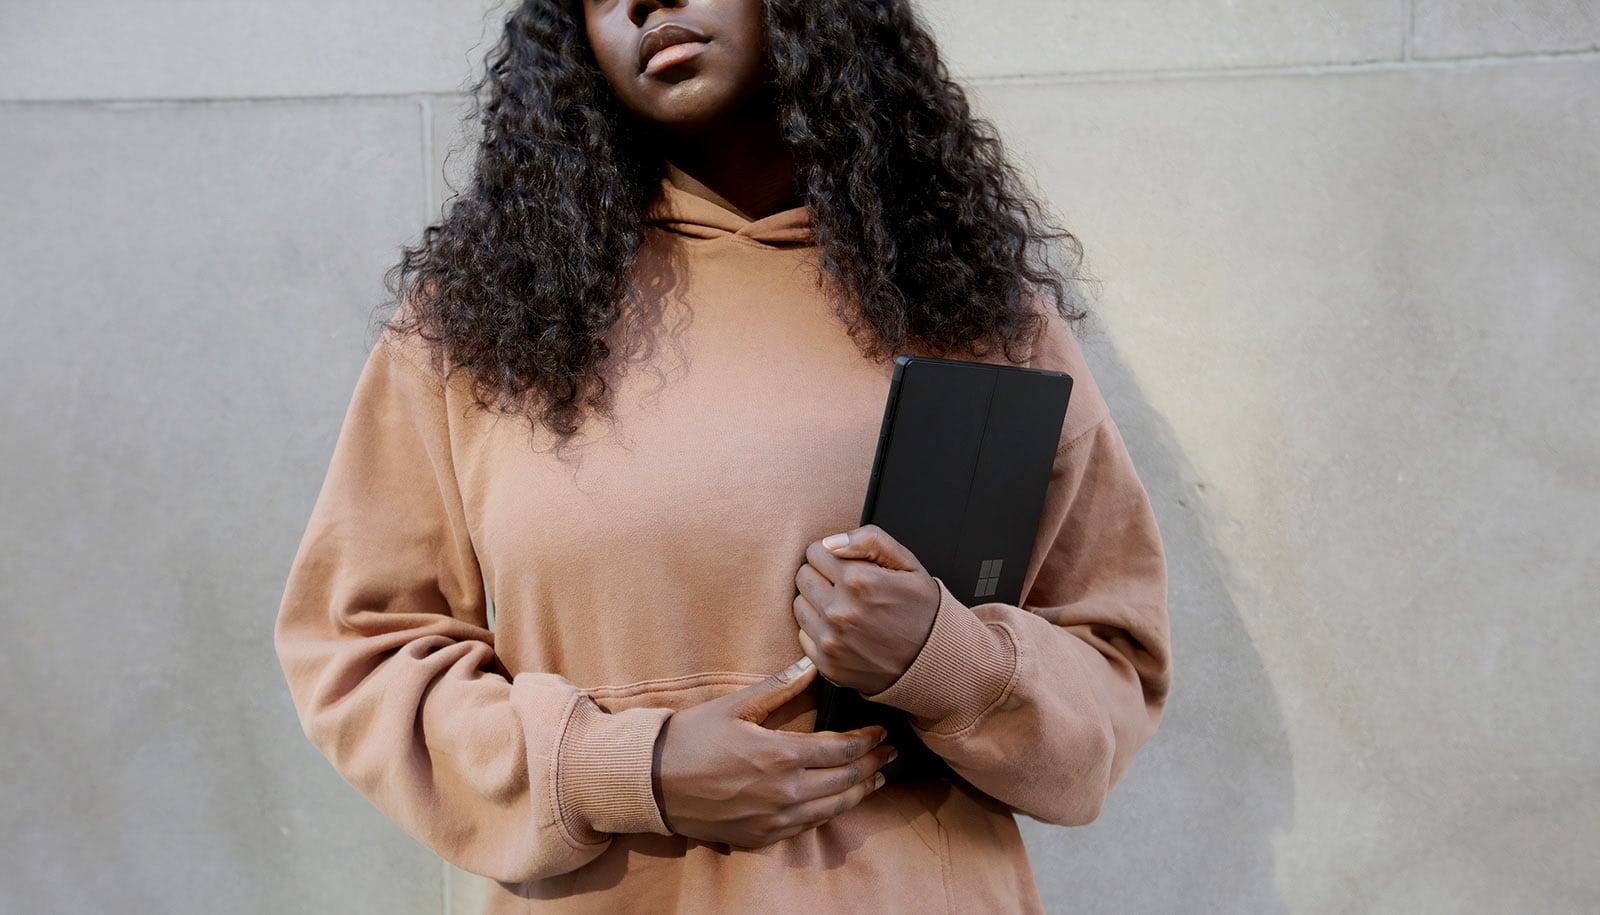 A dark-skinned person in a long, baggy hoodie, carrying a tablet computer